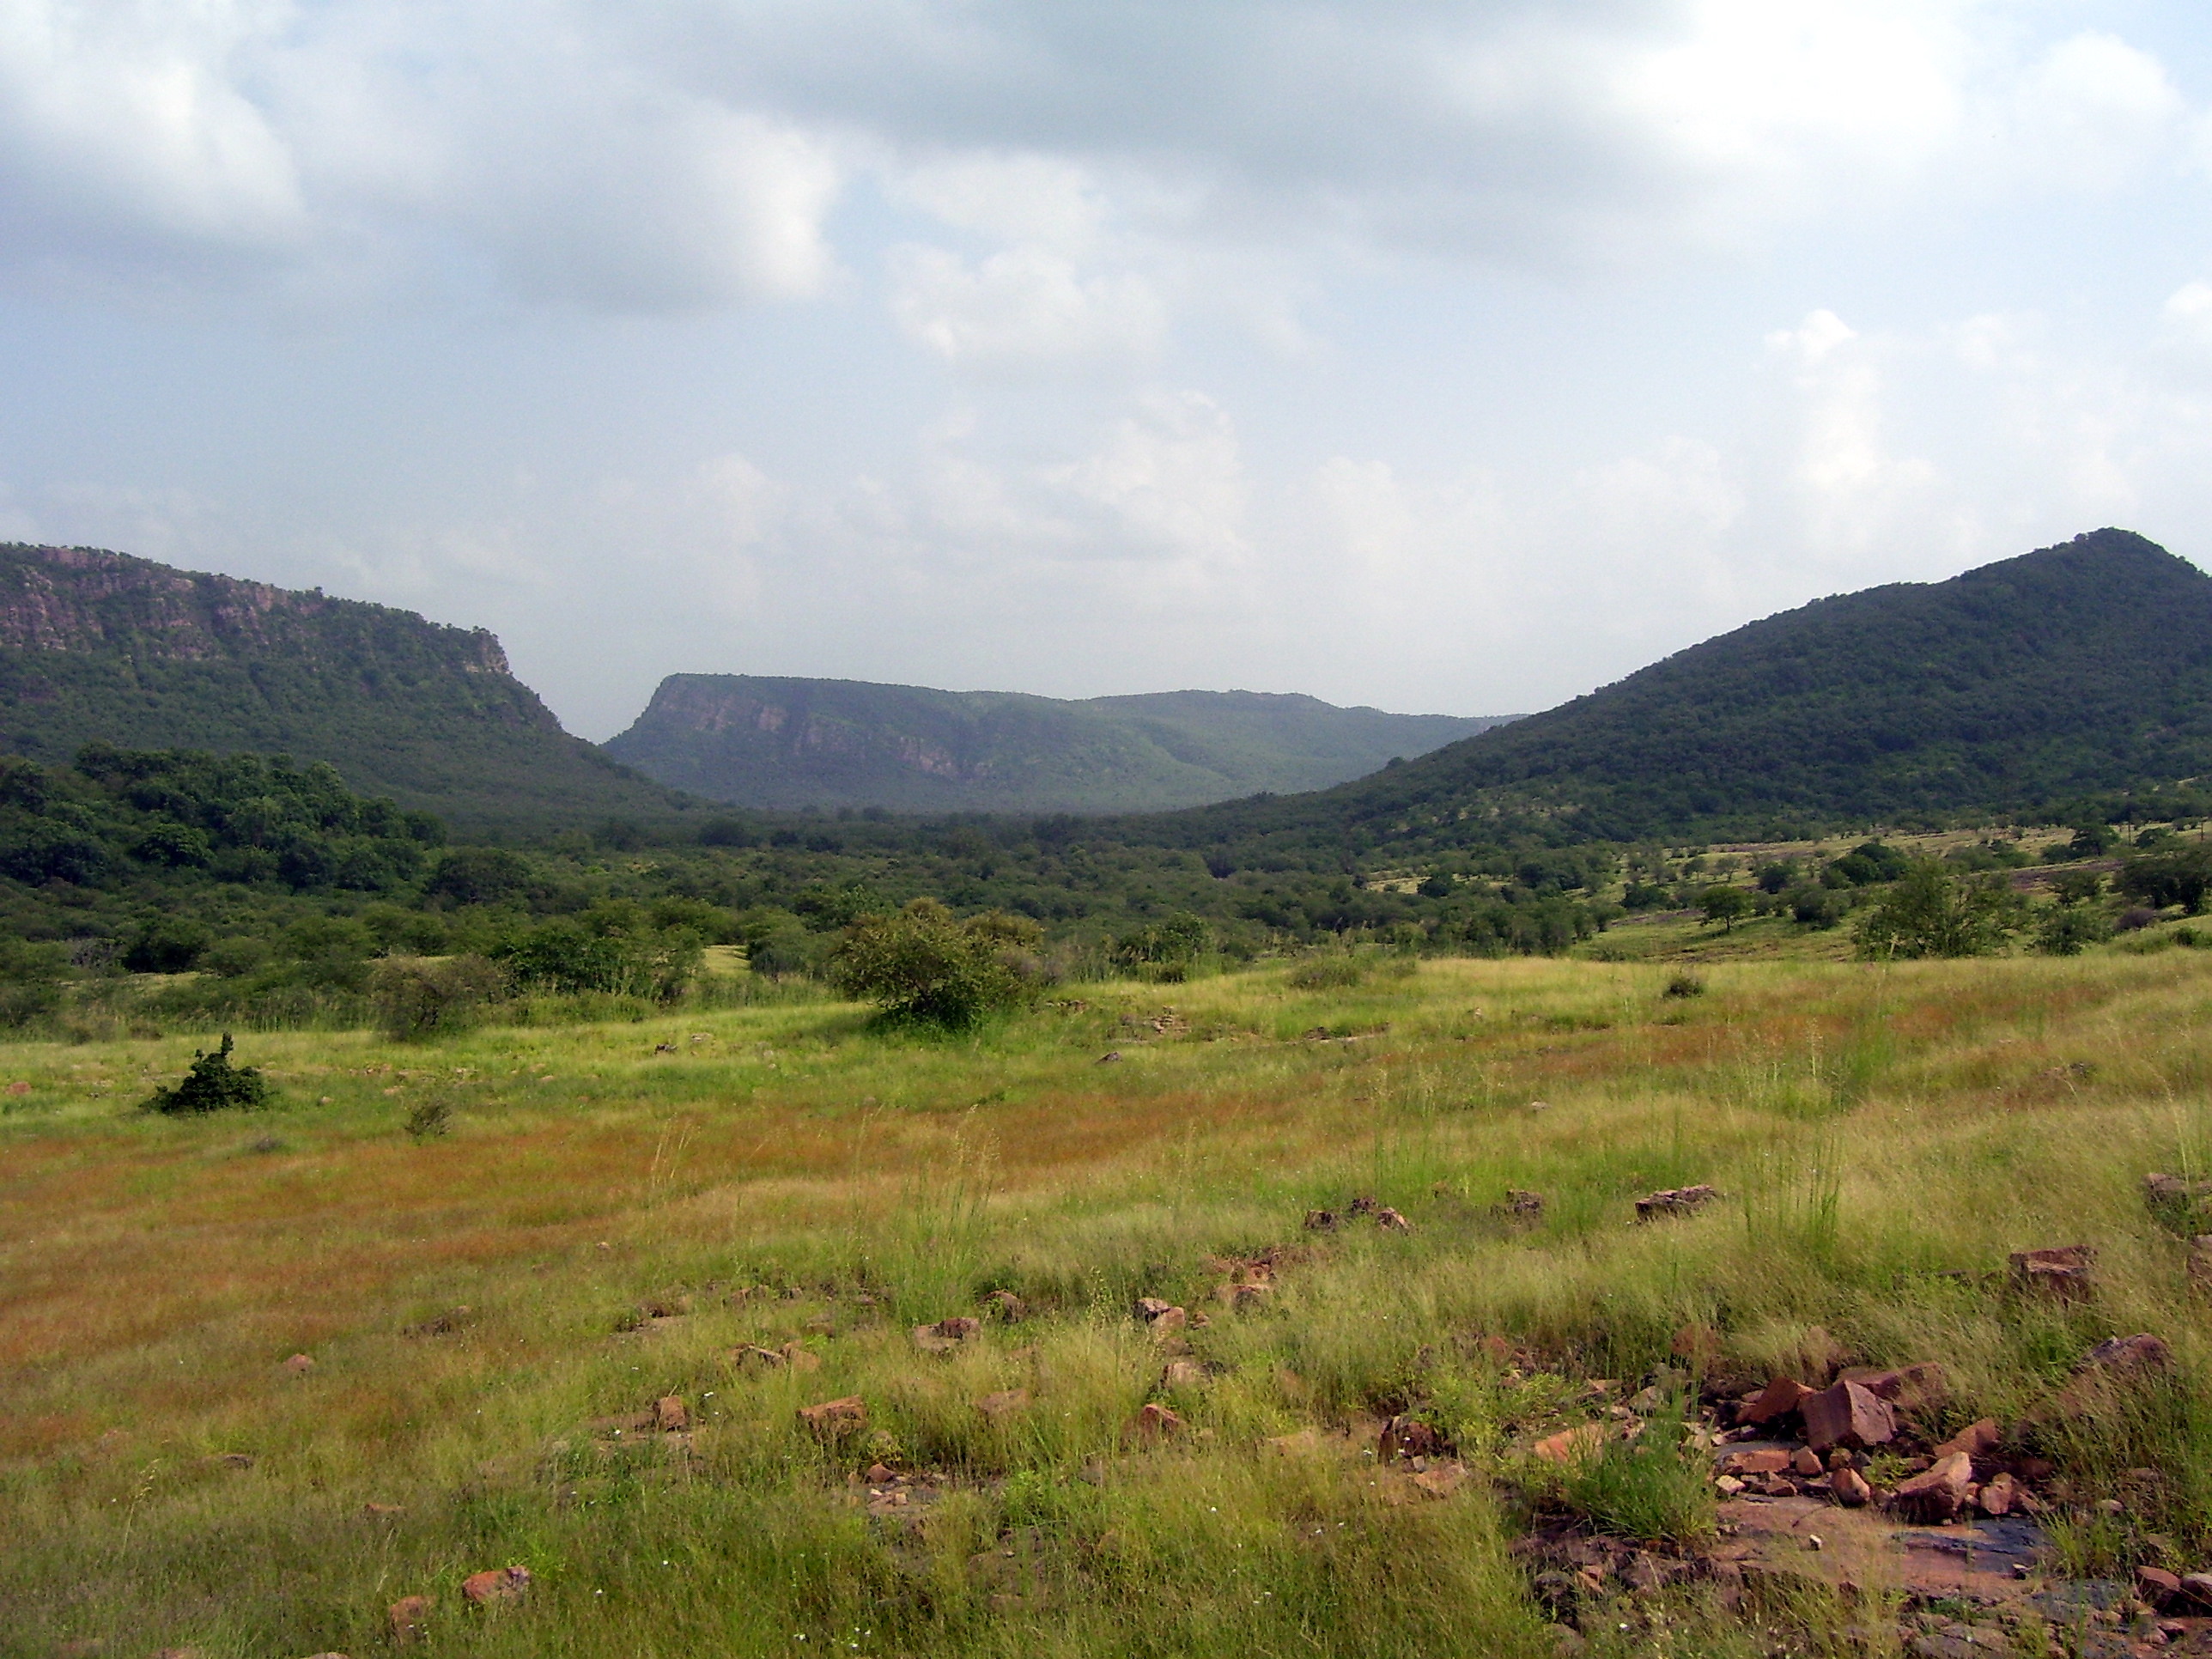 A view of Ranthambore National Park, Rajasthan. Credit: Wikimedia Commons